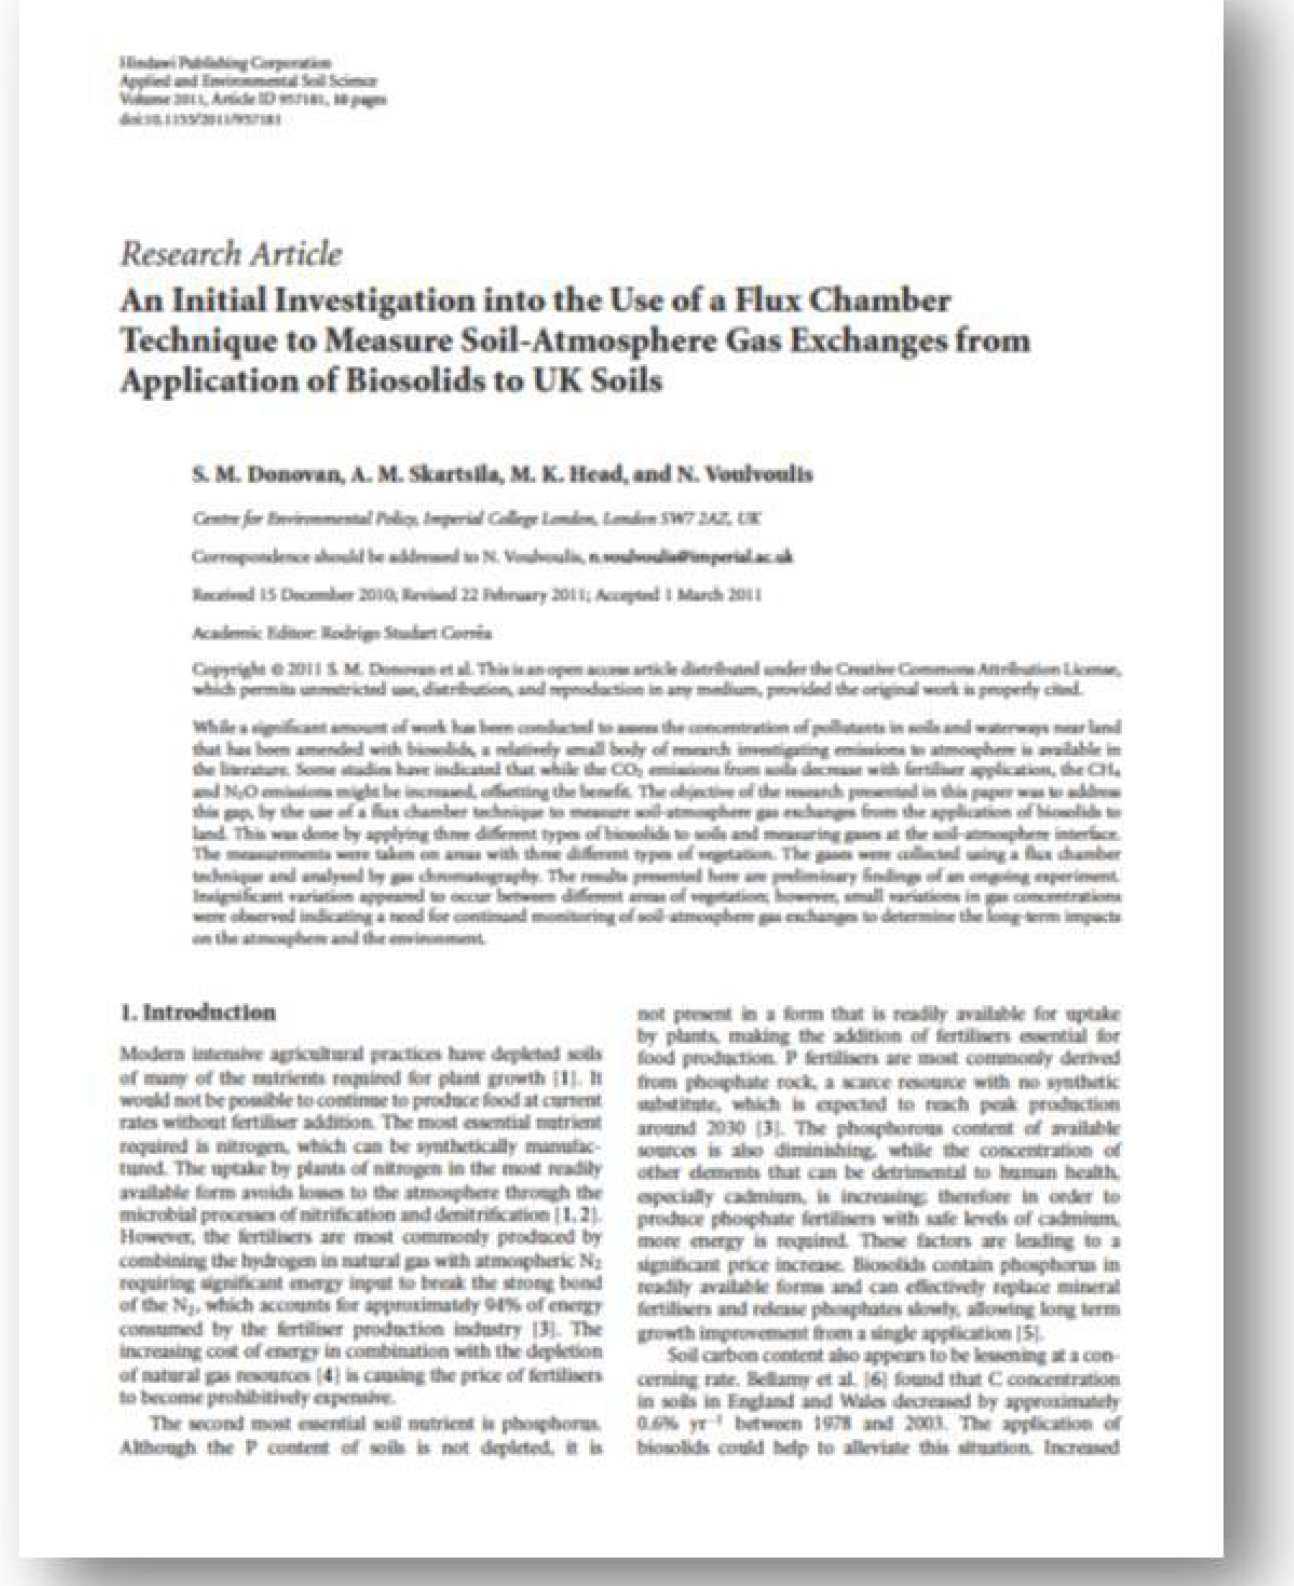 An Initial Investigation into the Use of a Flux Chamber Technique to Measure Soil-Atmosphere Gas Exchanges from Application of Biosolids to UK Soils